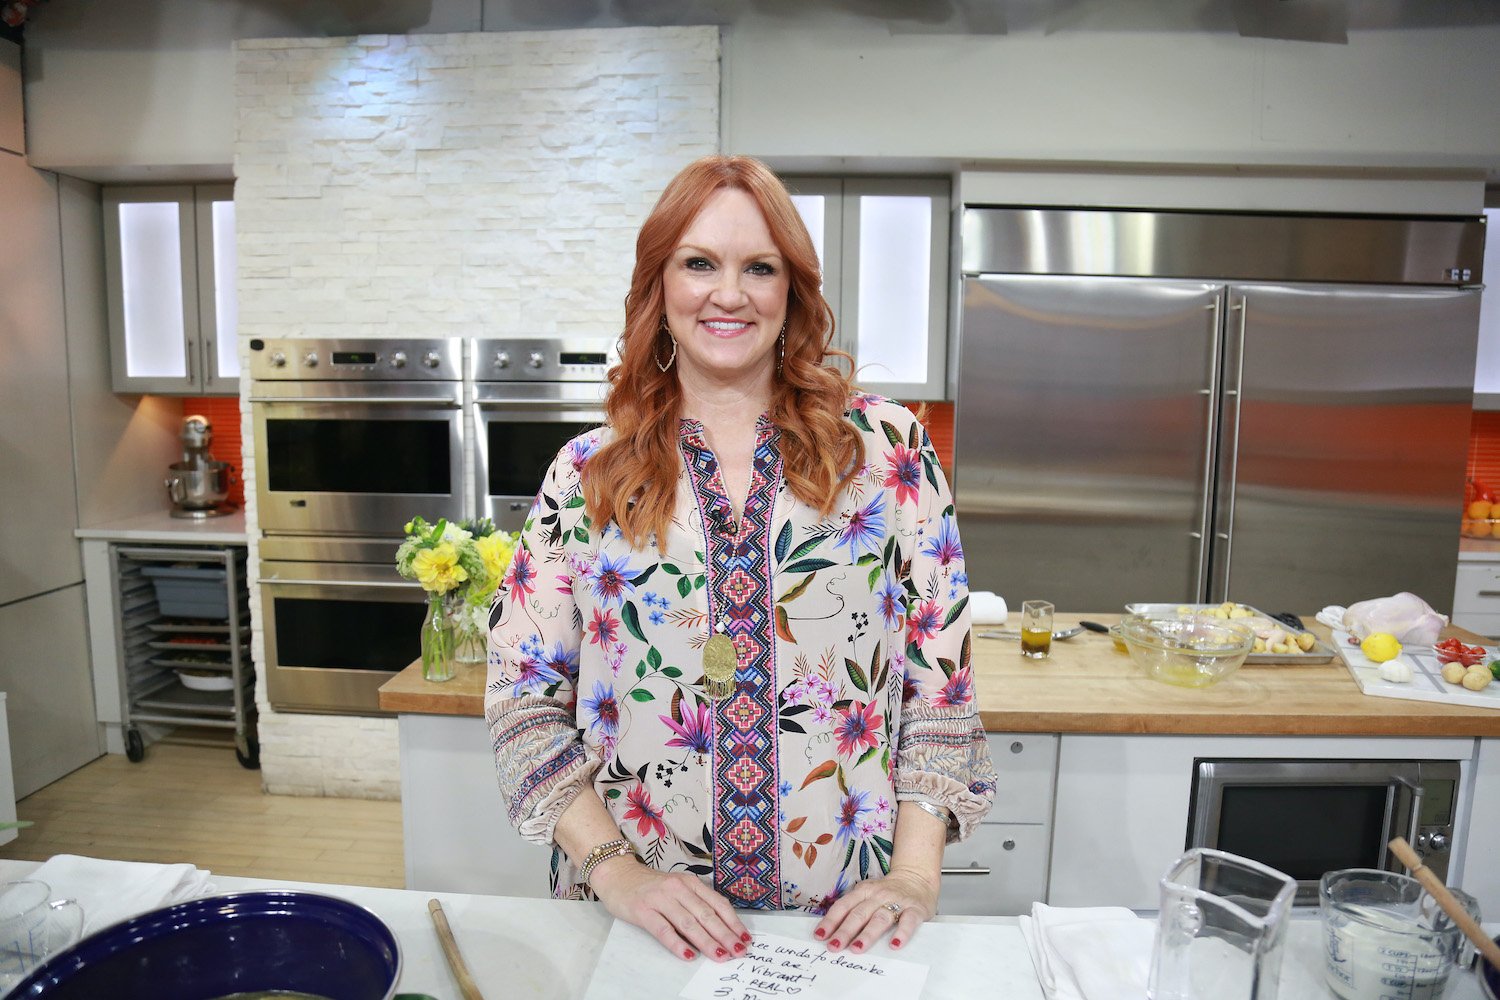 Ree Drummond on the 'Today' show in 2019